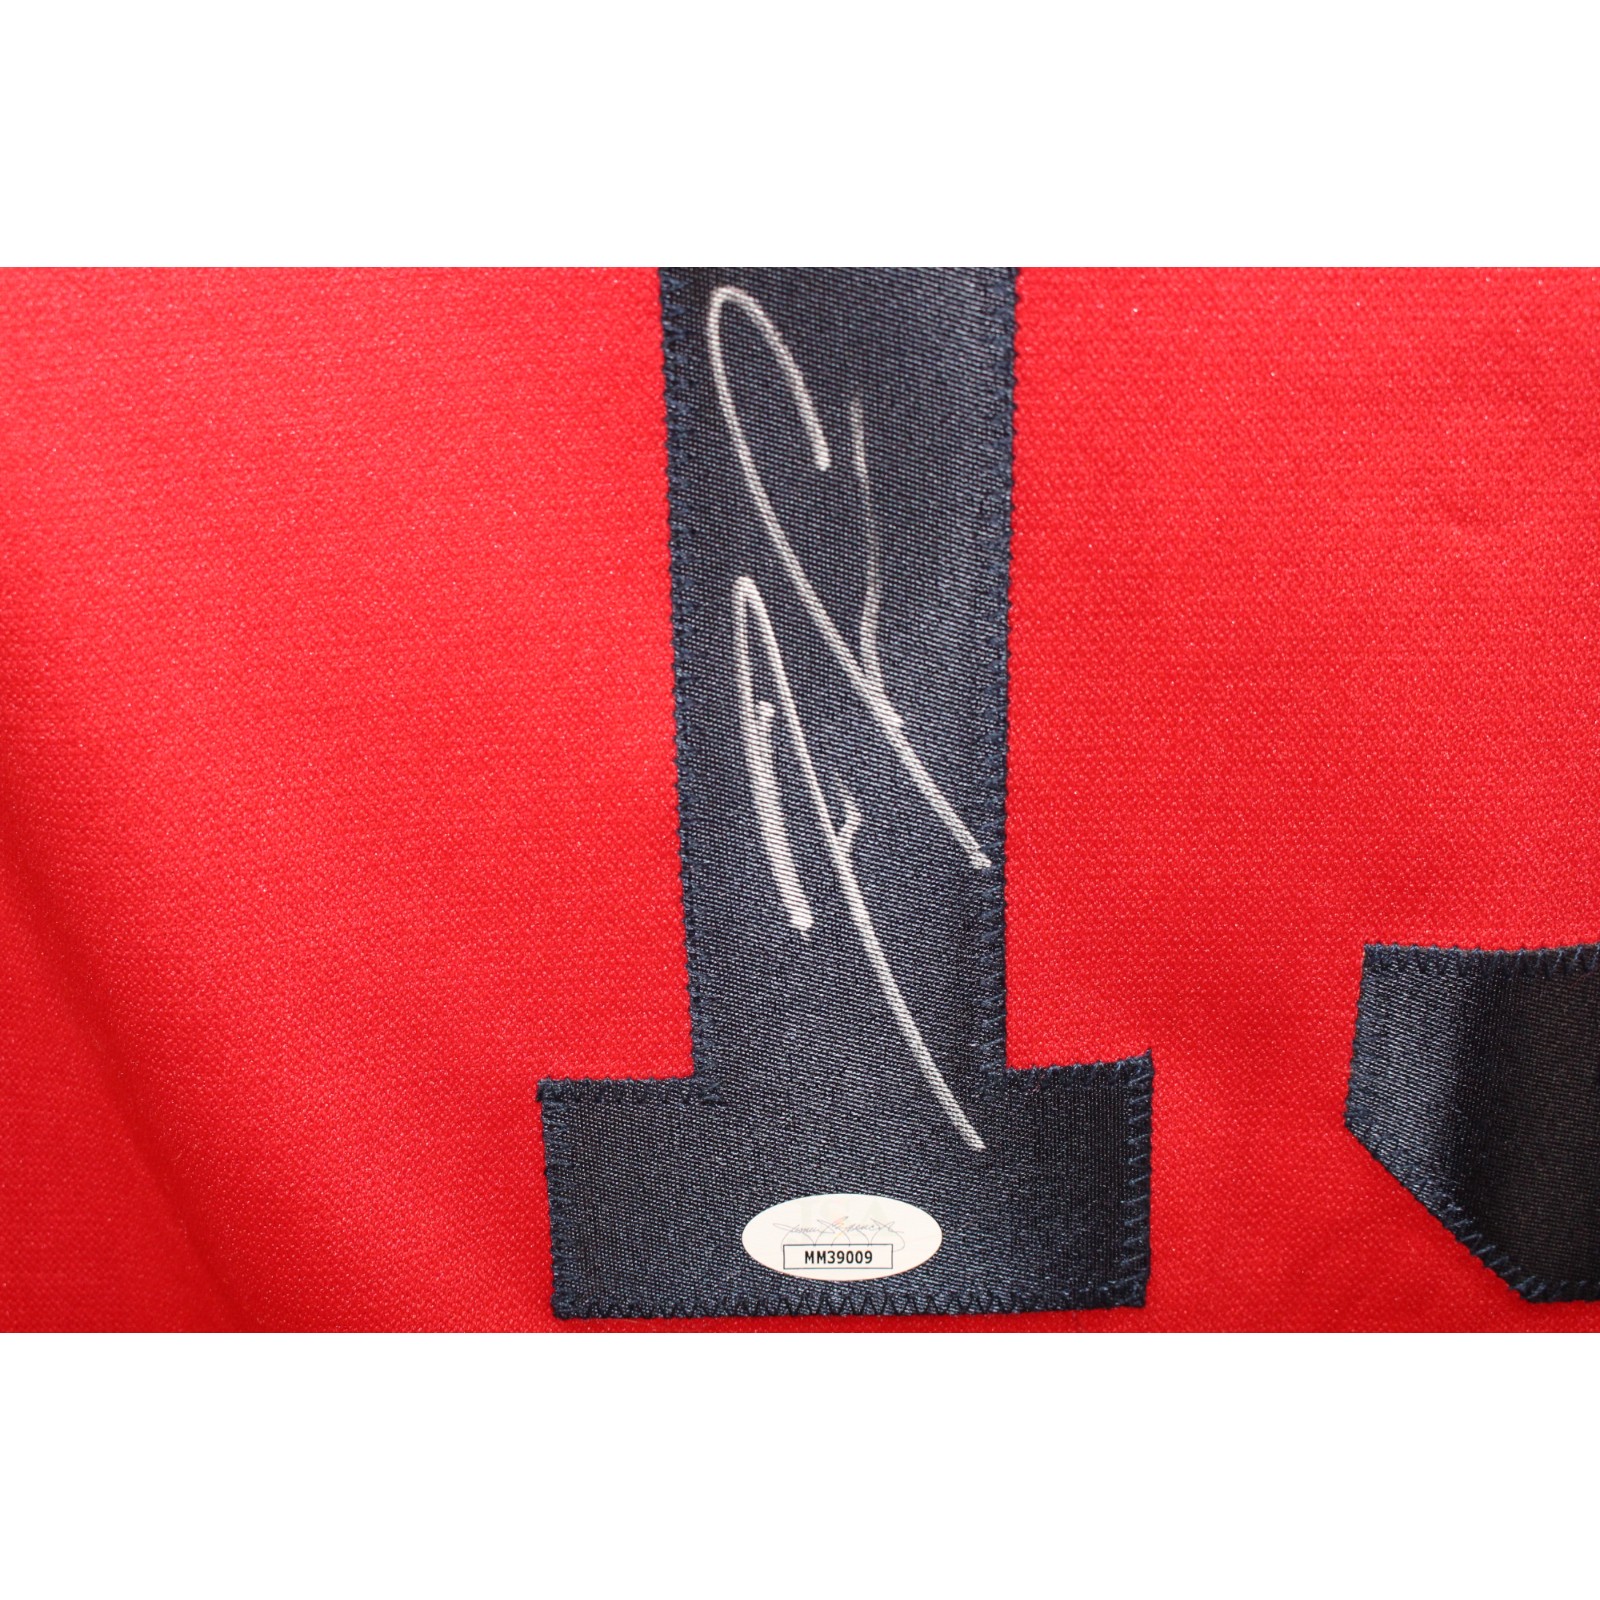 Ronald Acuna Autographed/Signed Pro Style Red Jersey JSA